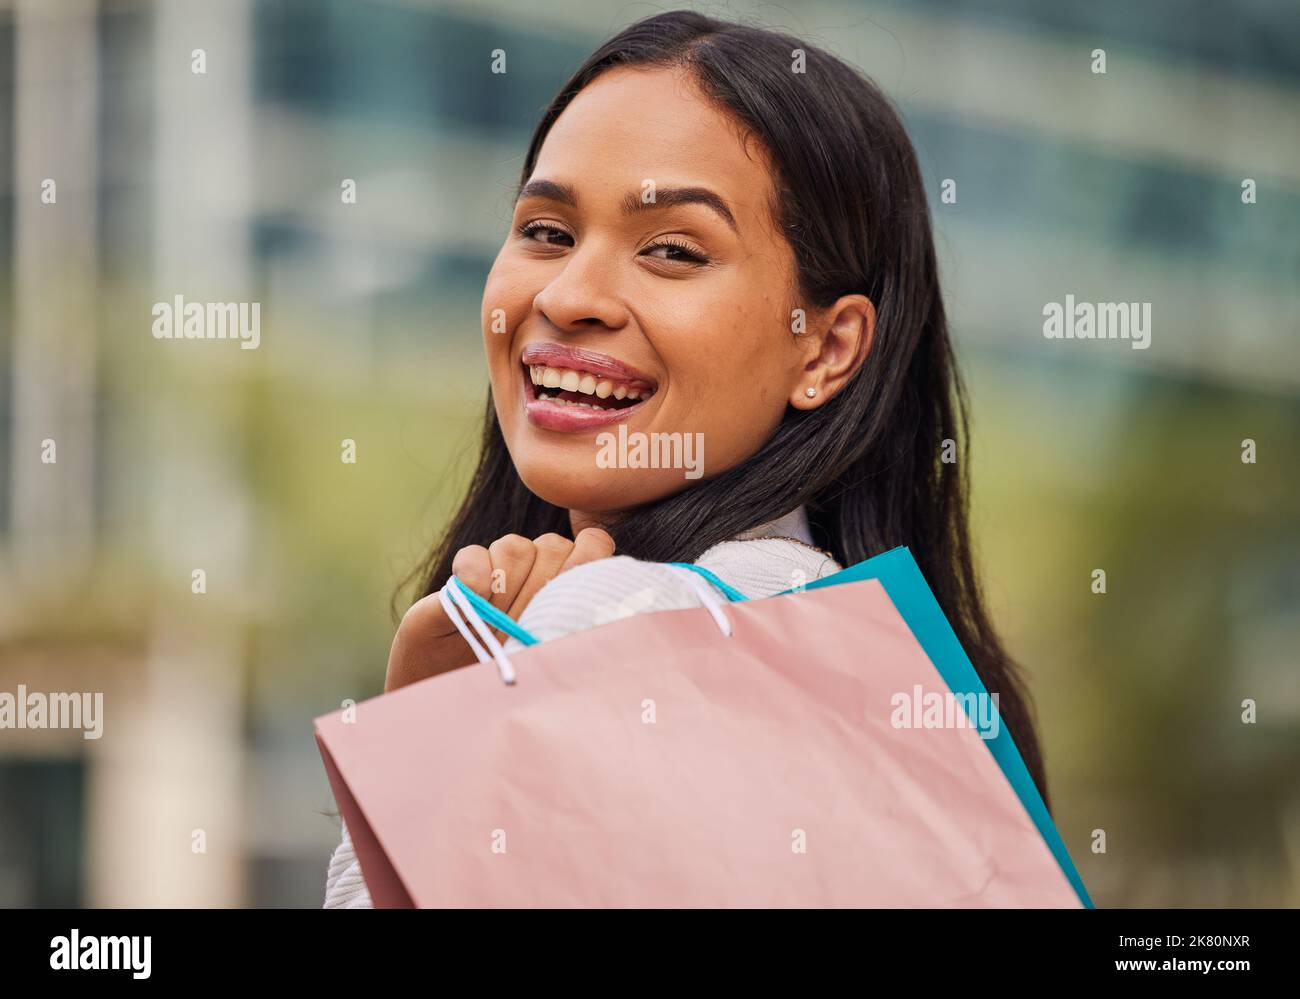 Retail, shopping and bags with woman in city for fashion, summer and gift  for rich lifestyle. Luxury, sales and wow with happy girl customer in  street Stock Photo - Alamy